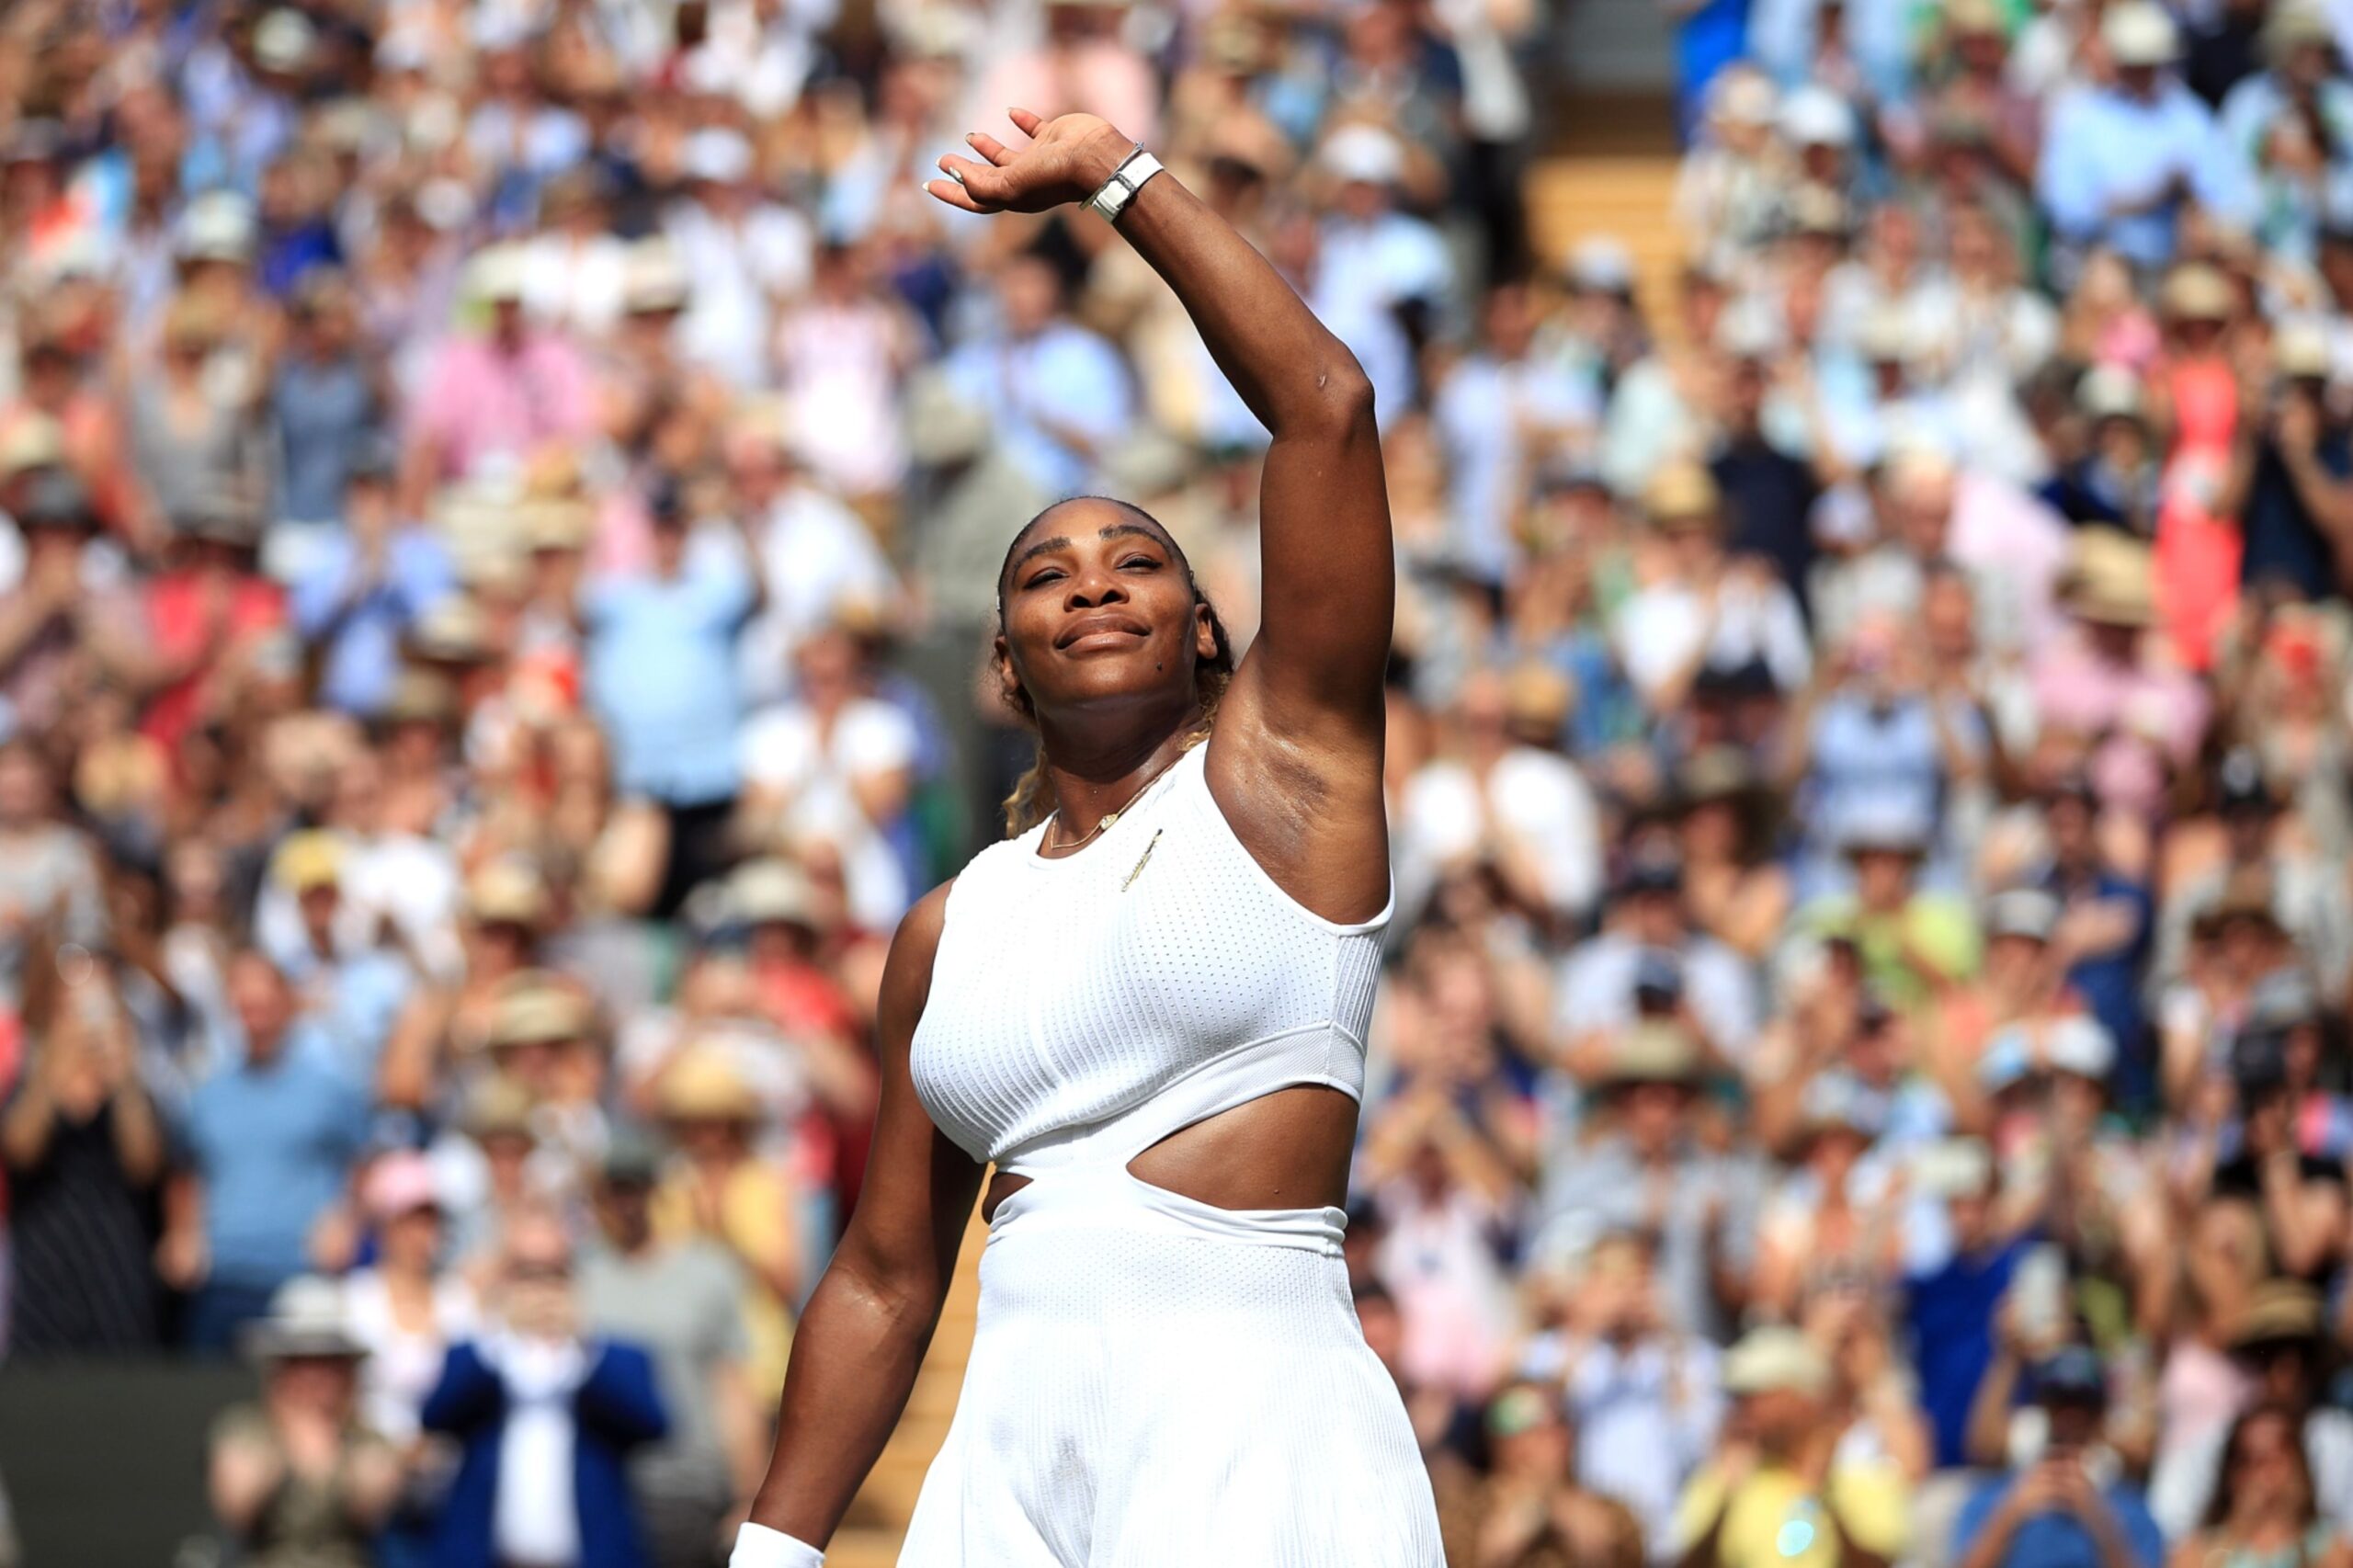 Serena Williams announces in poignant essay that she’s retiring from tennis